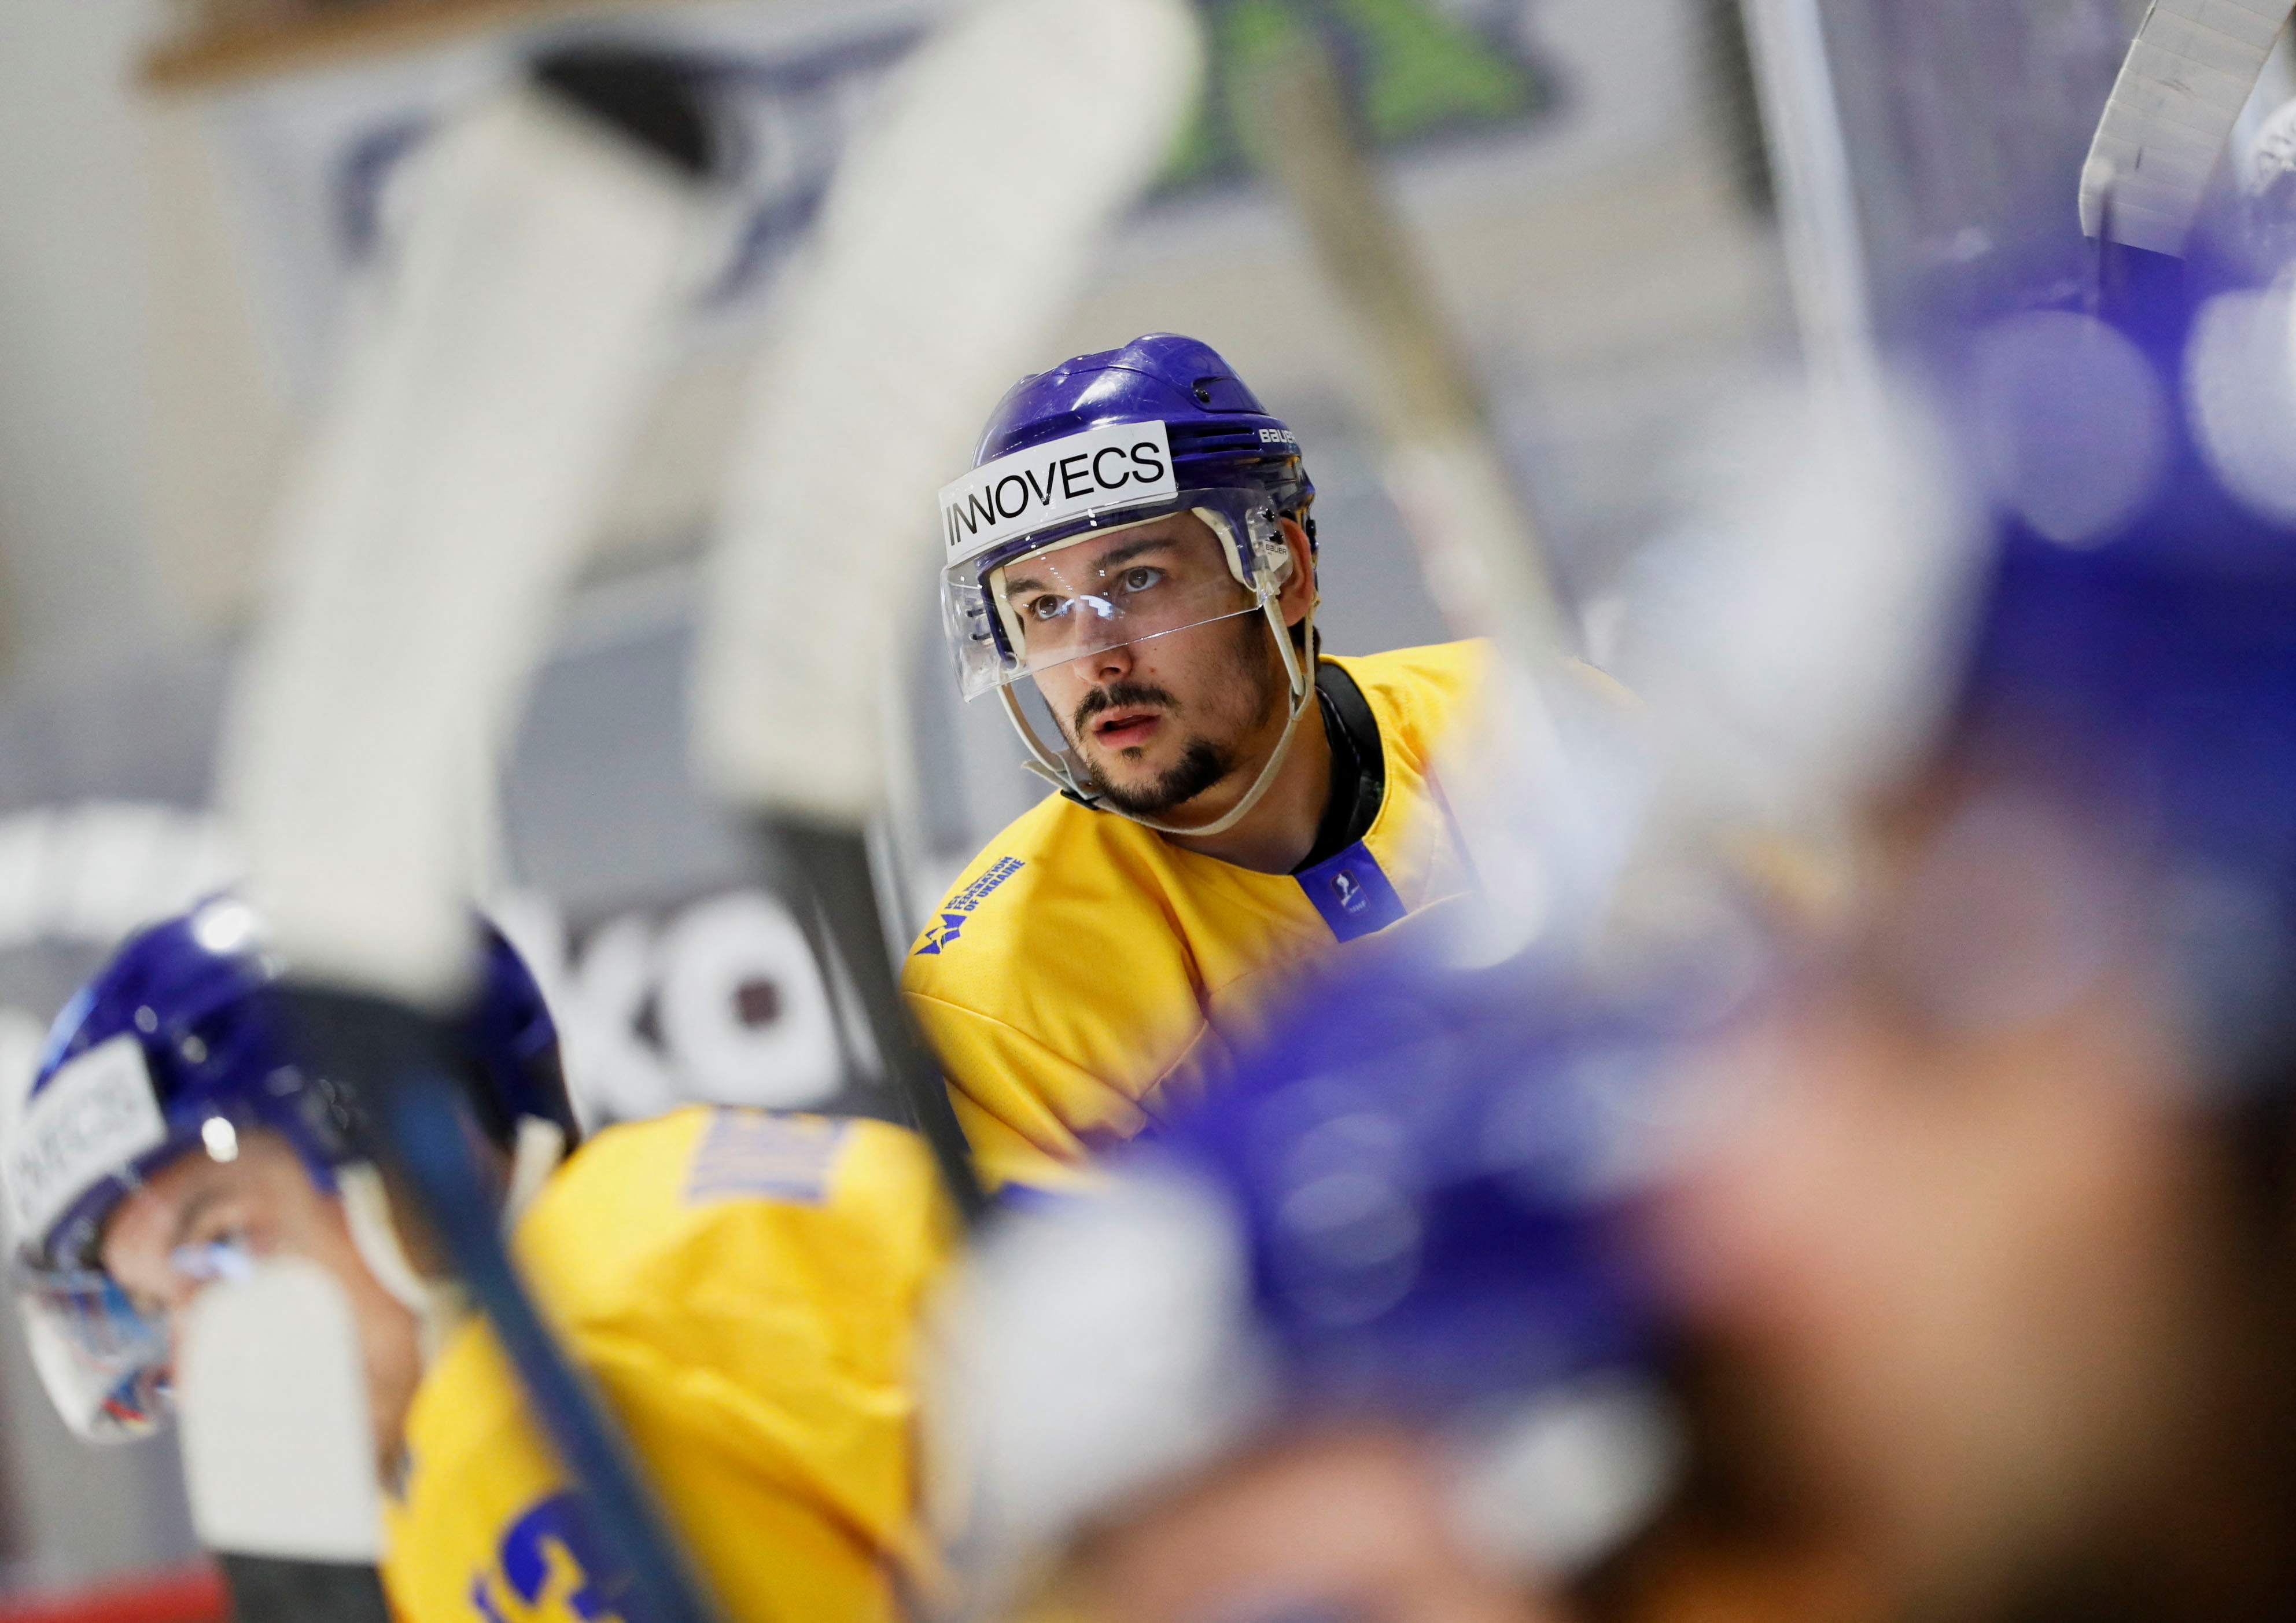 Member of the Ukraine's men's ice hockey team Krivoshapkin reacts during a friendly game against Hungary at the Miskolc Ice Hall, in Miskolc